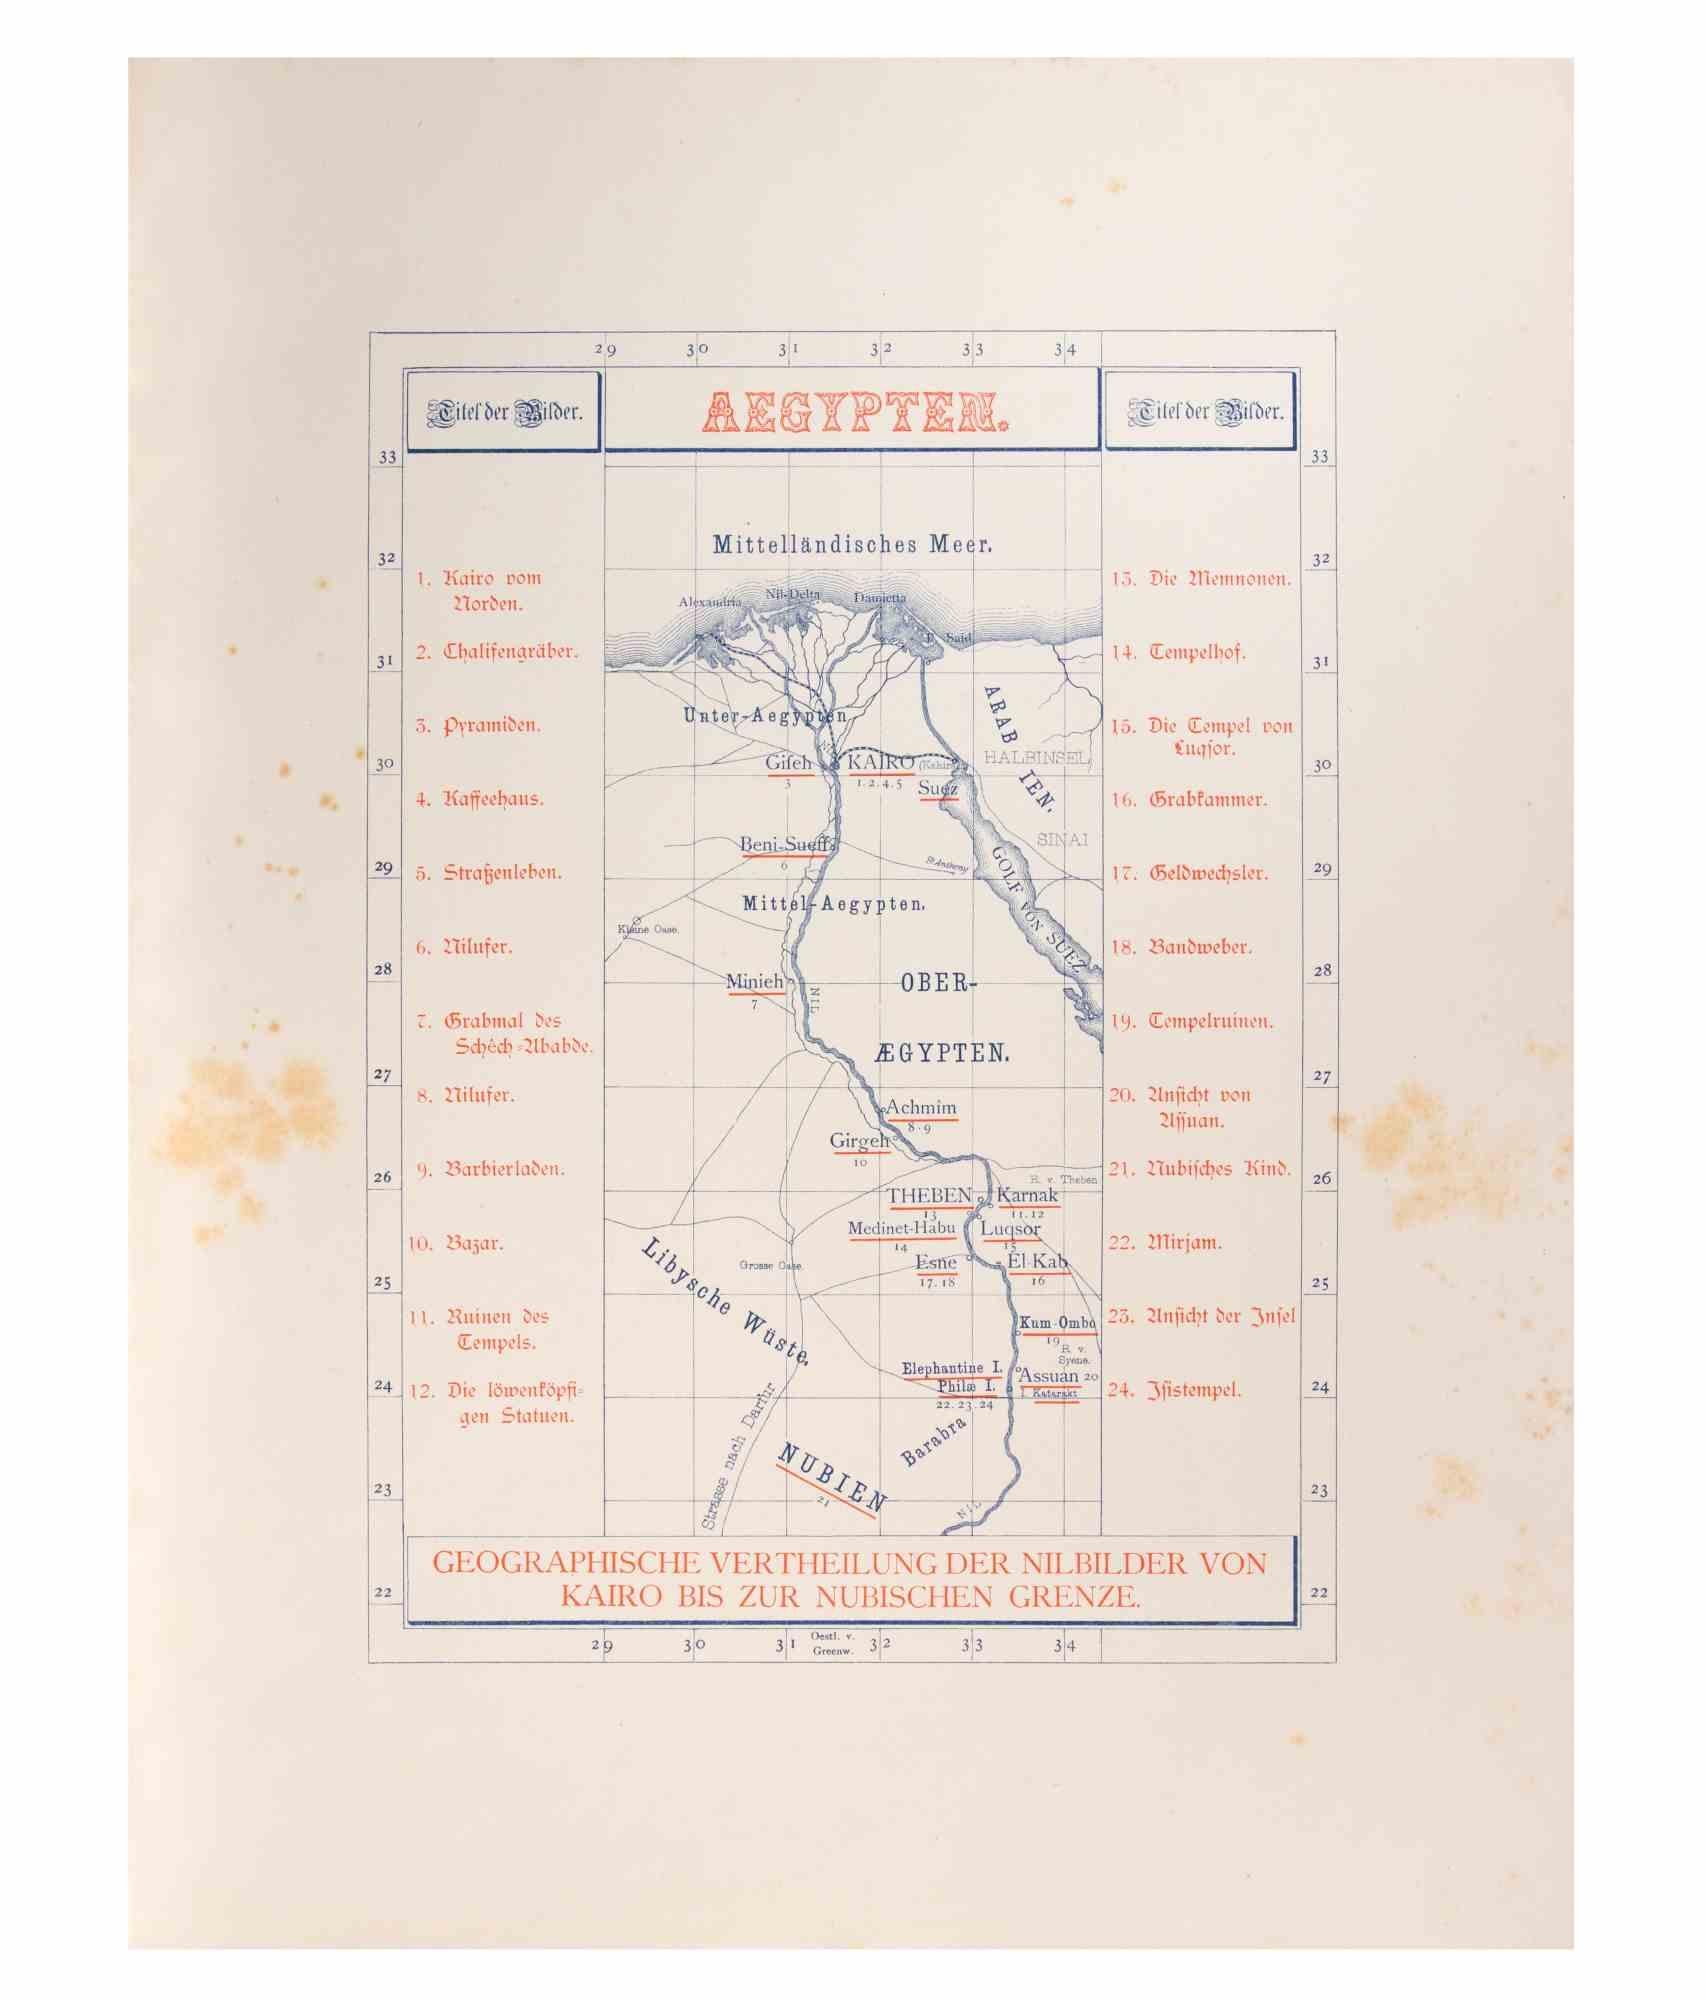 Nile trip map is a modern artwork realized d'apres Karl Werner.

Mixed colored cromolithograph. 

The artwork is after the watercolors realized by the artist during a trip to Egypt between 1862 and 1865.

This edition is from 1881.

Signed on plate.